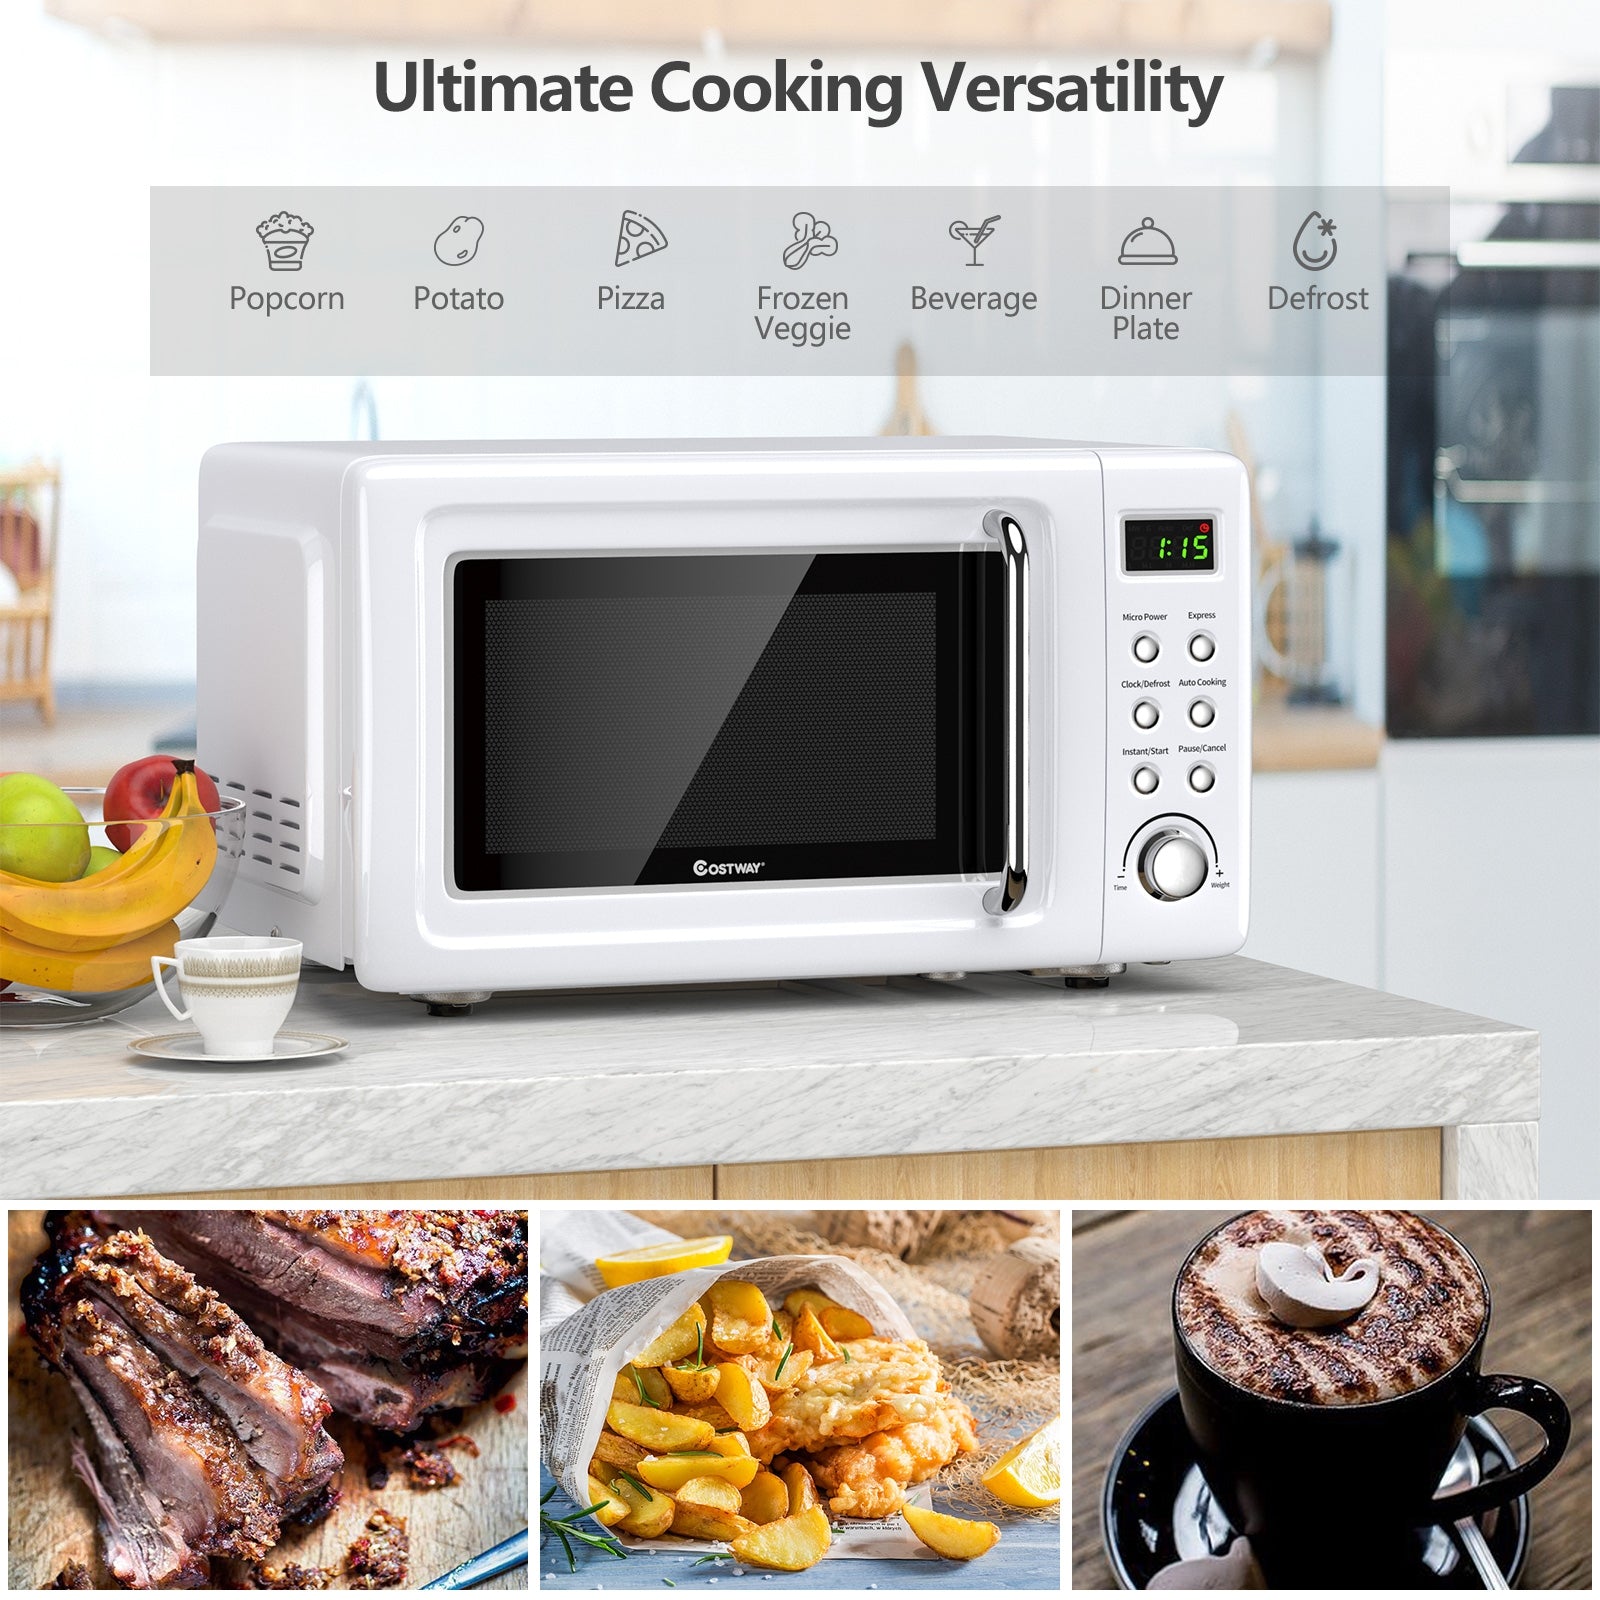 Multifunctional Convenience: Our microwave oven comes with a default cooking menu for popular foods like popcorn, pizza, vegetables, meat, fish, and more, providing endless convenience for your daily life.